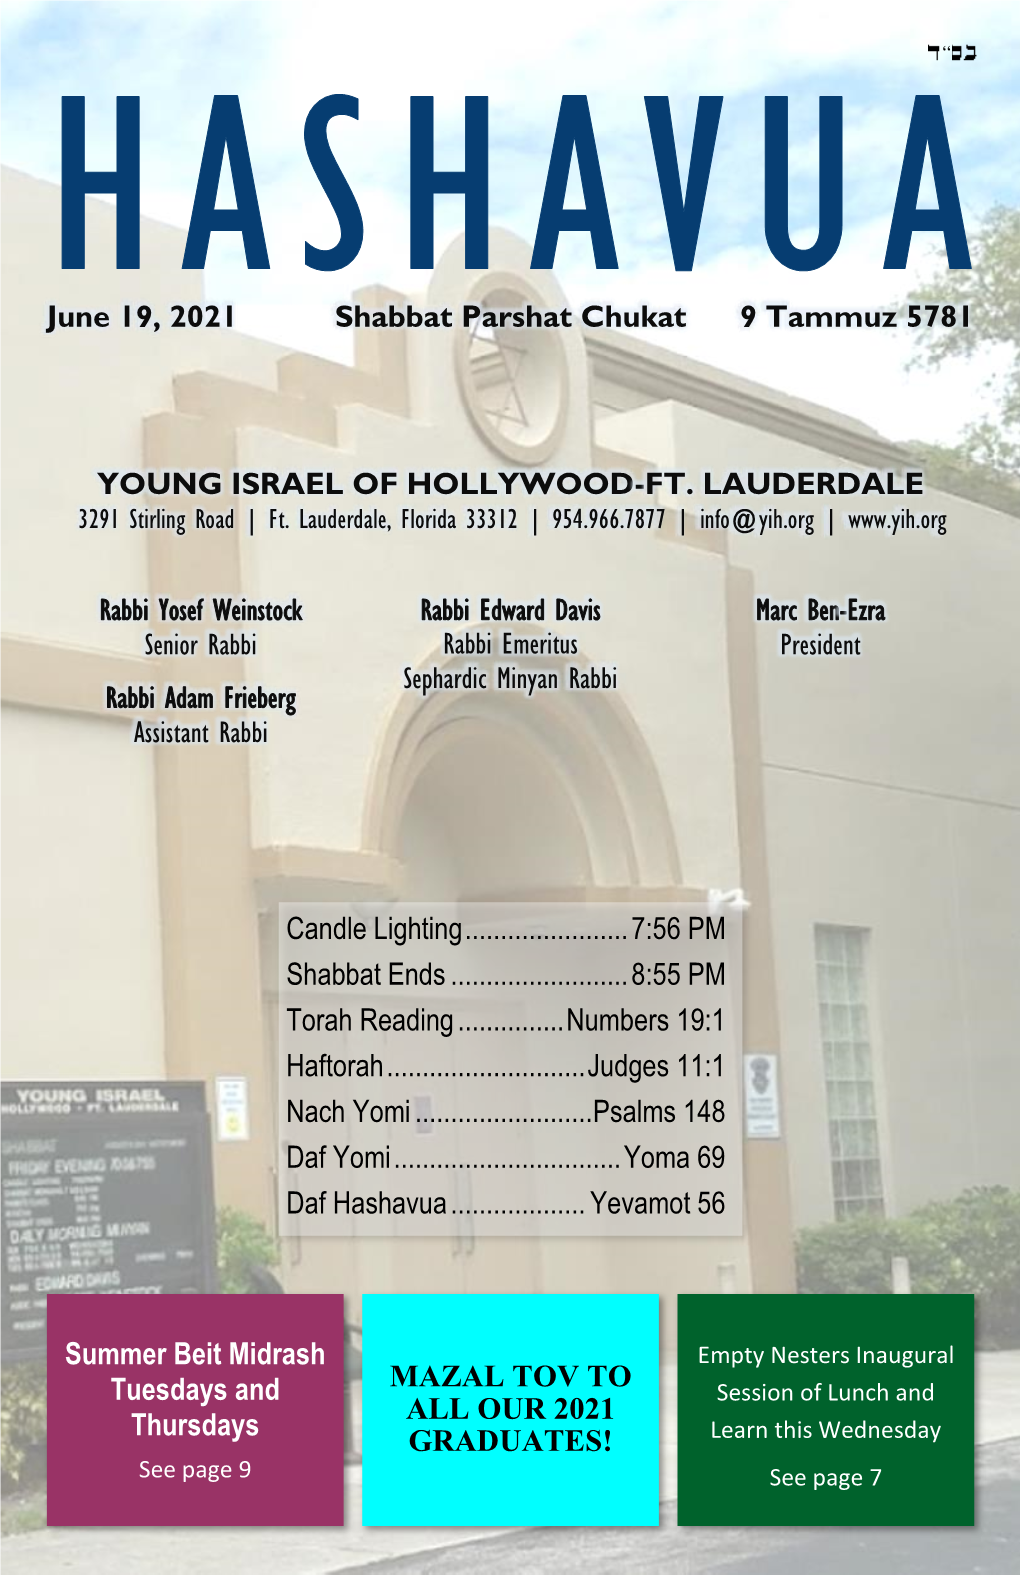 YOUNG ISRAEL of HOLLYWOOD-FT. LAUDERDALE 3291 Stirling Road | Ft